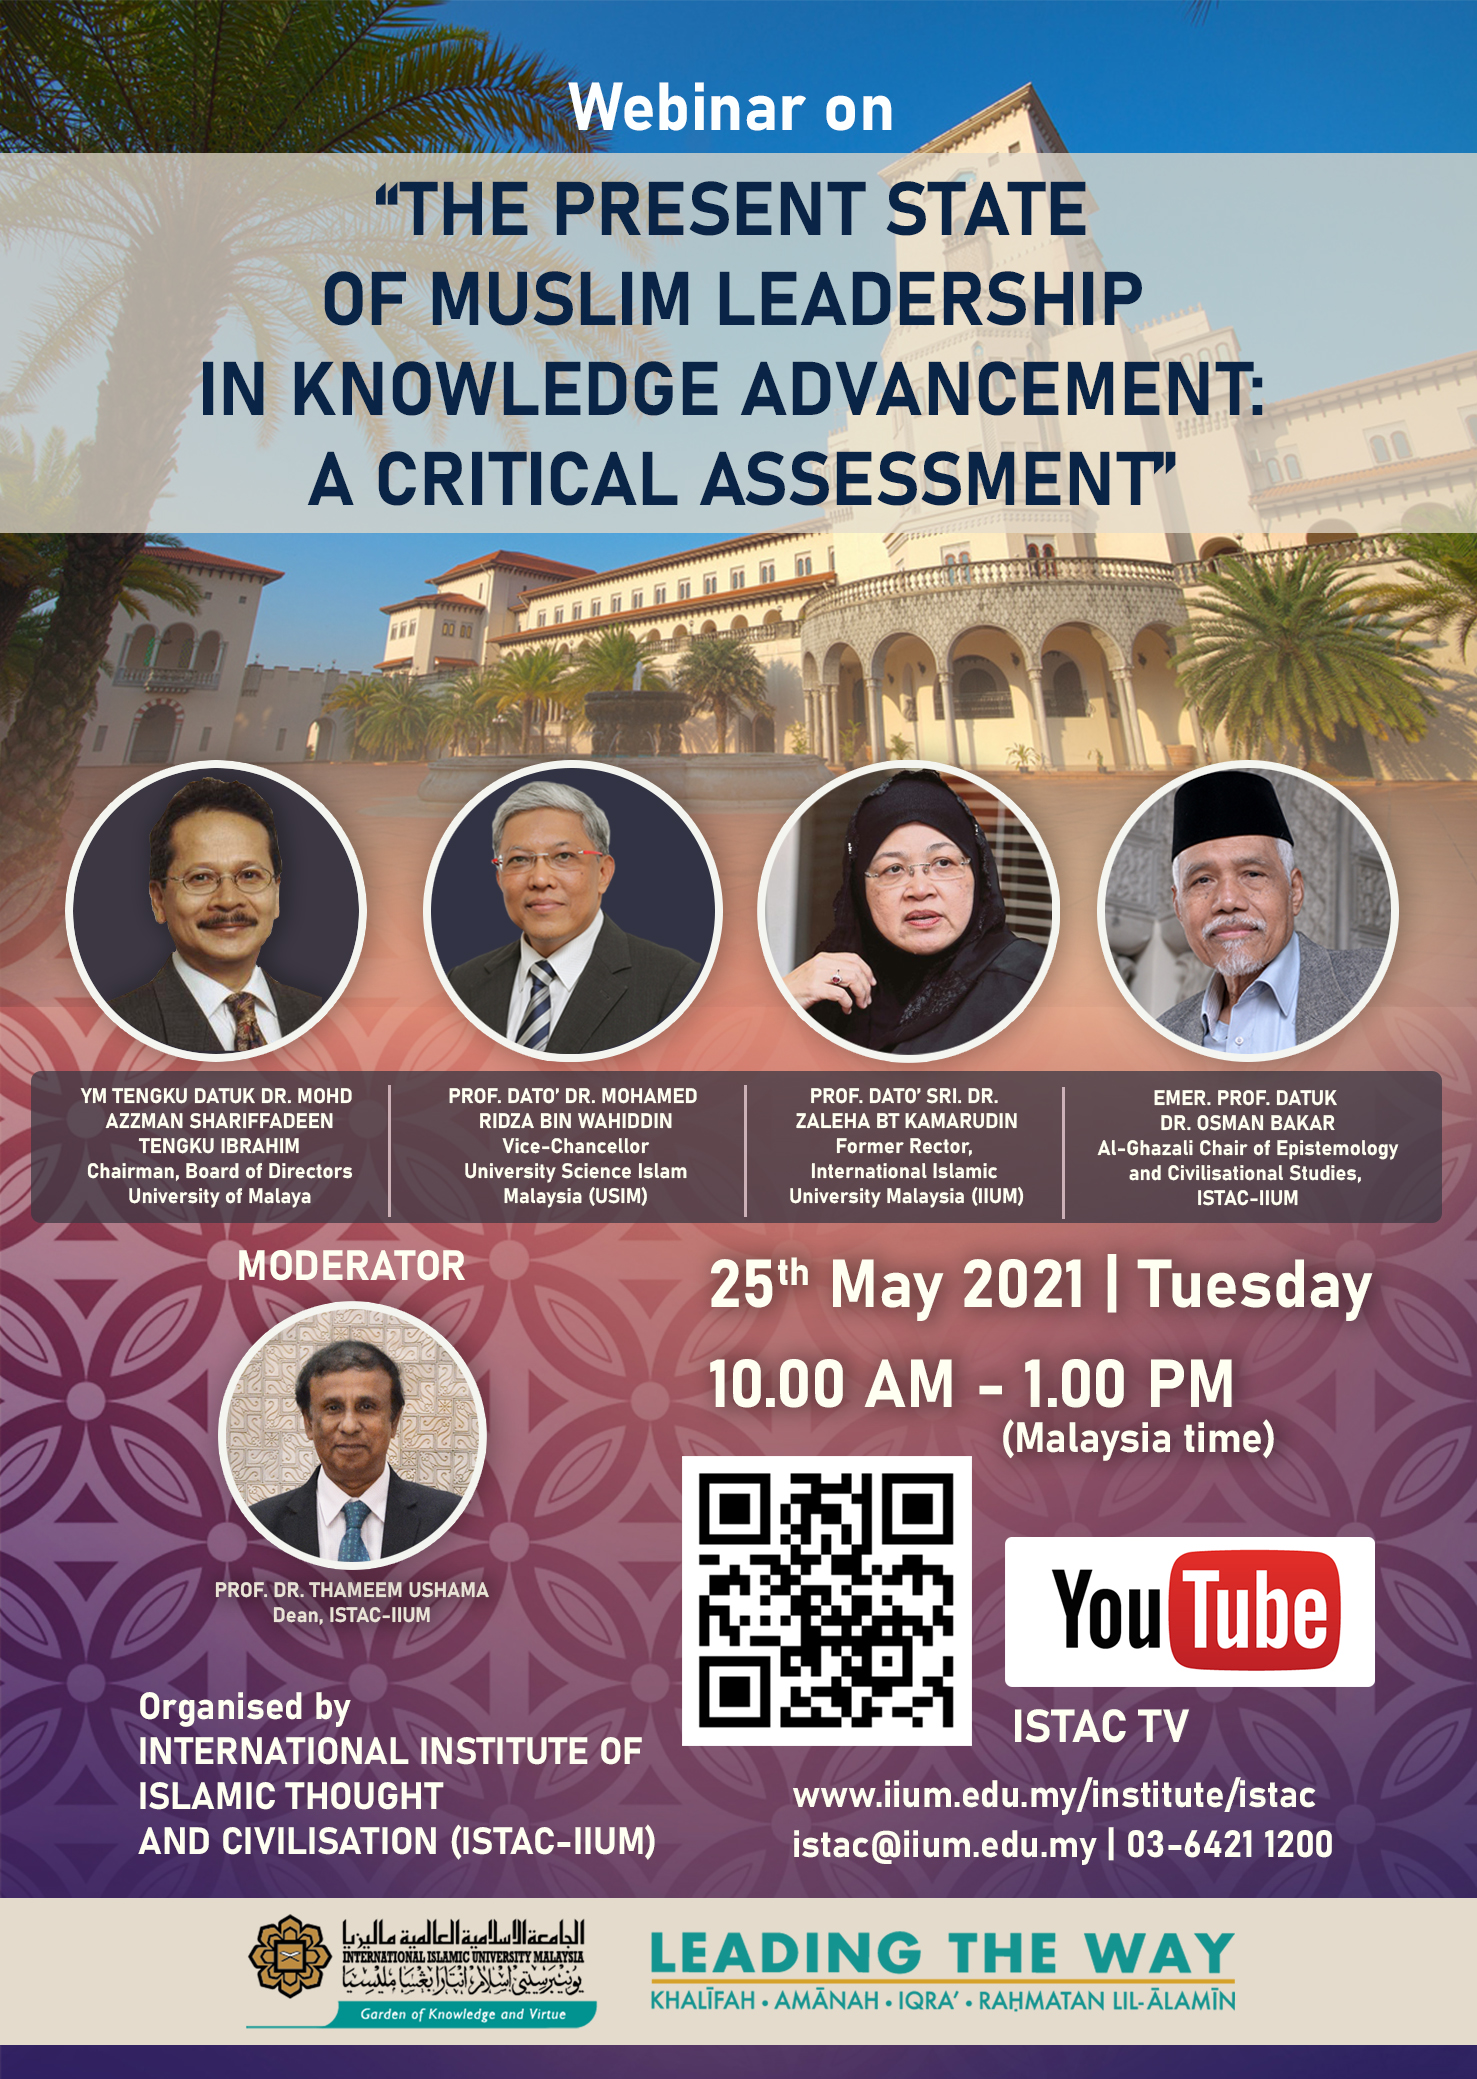 webinar on “THE PRESENT STATE OF MUSLIM LEADERSHIP IN KNOWLEDGE ADVANCEMENT: A CRITICAL ASSESSMENT”